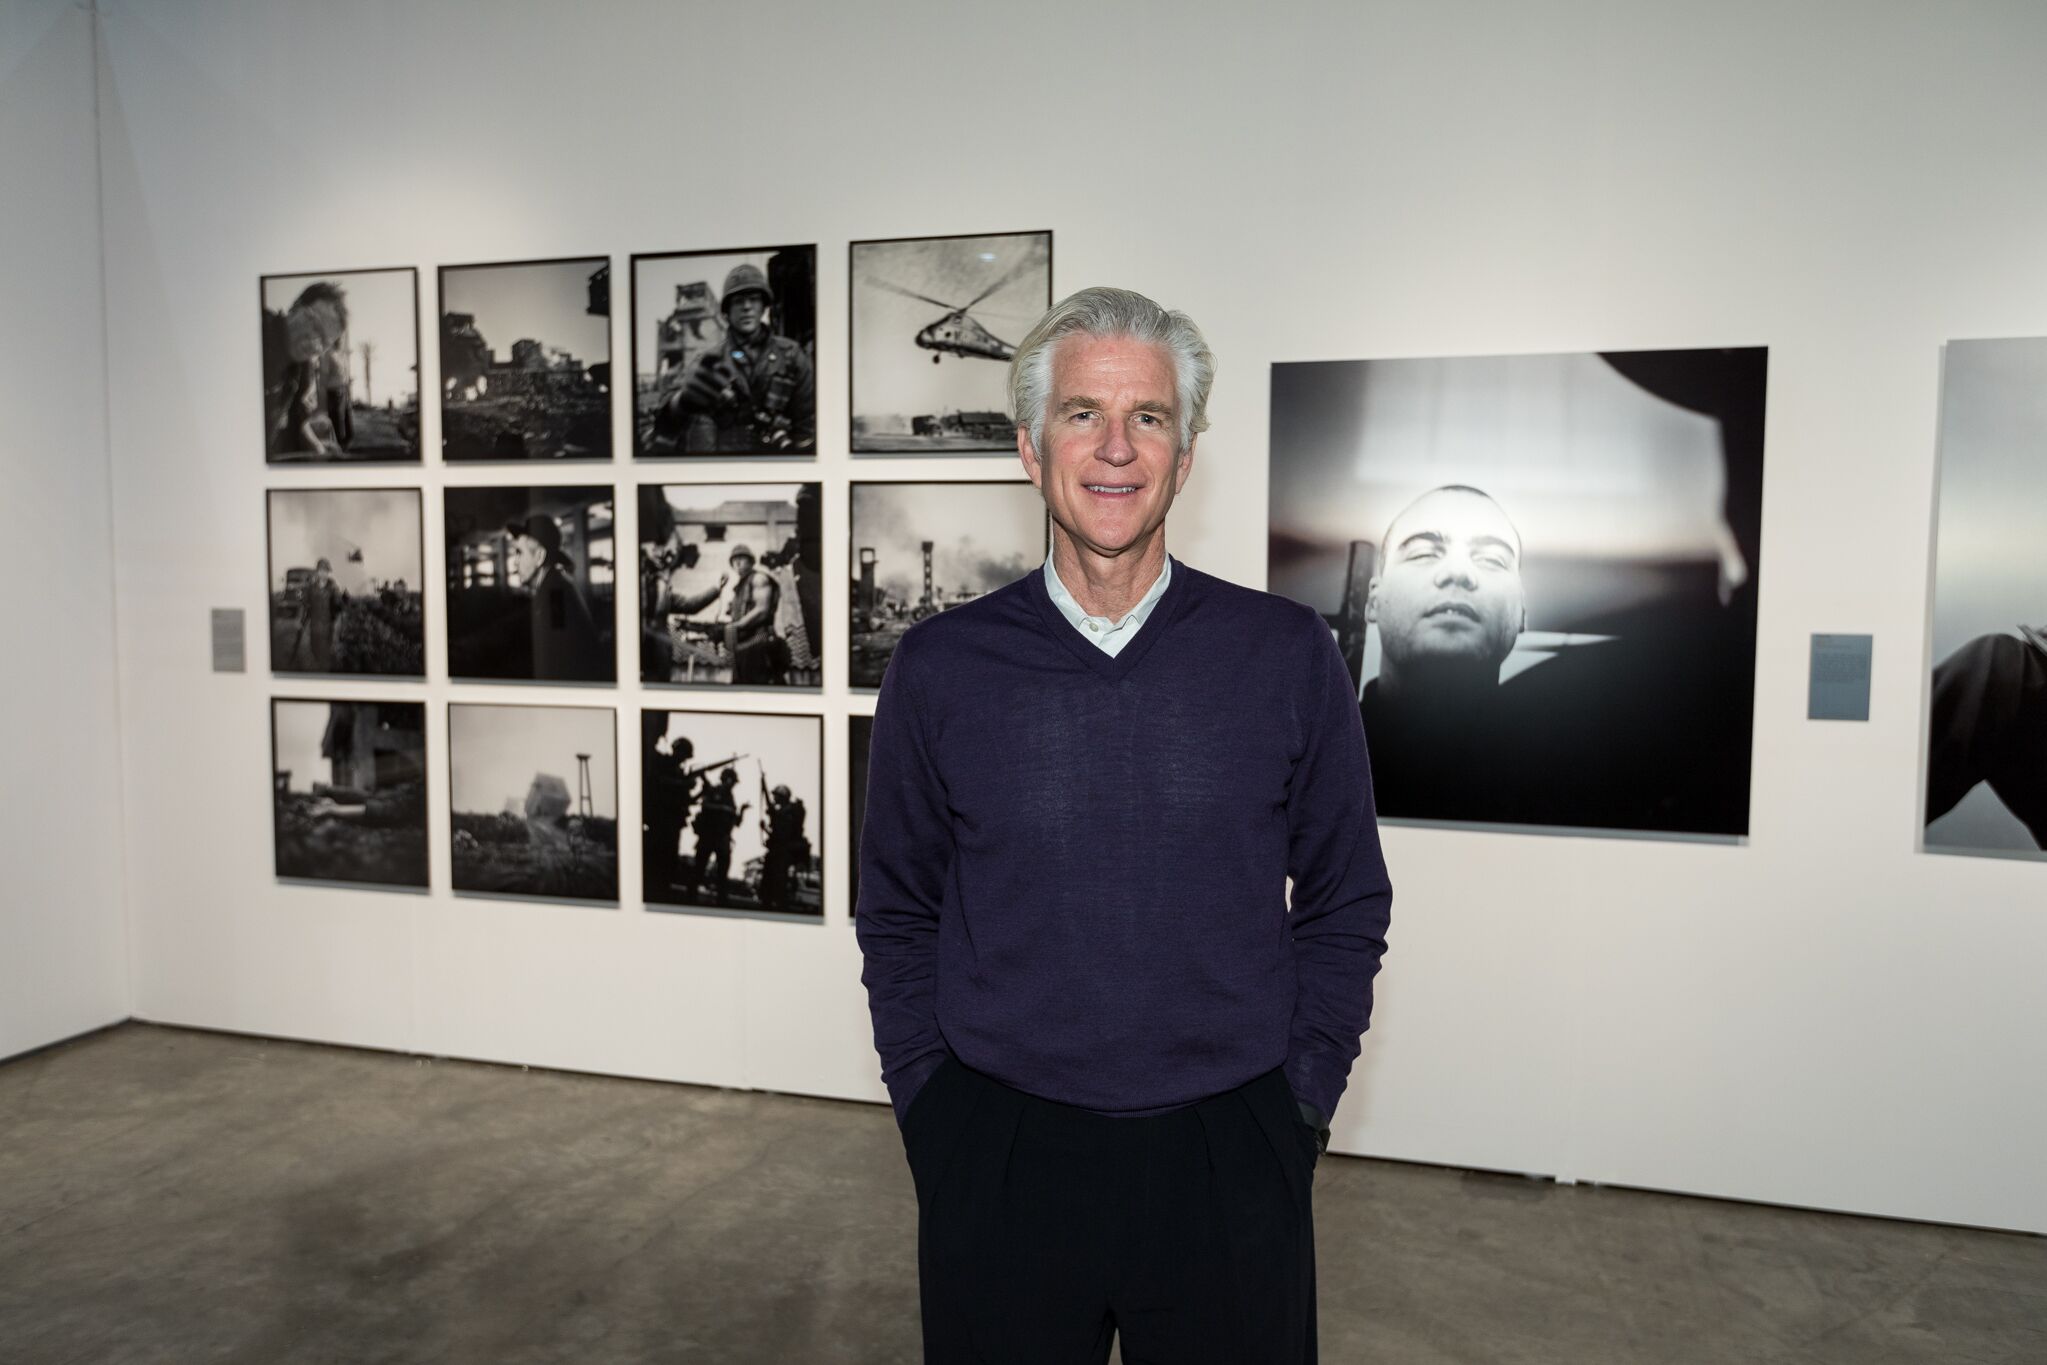 Matthew Modine exhibited his collection of photographs that he took while on the set of Full Metal Jacket. All proceeds from the sale of the photographs goes to the Purple Heart Foundation, which serves to benefit veterans, especially those wounded in combat.